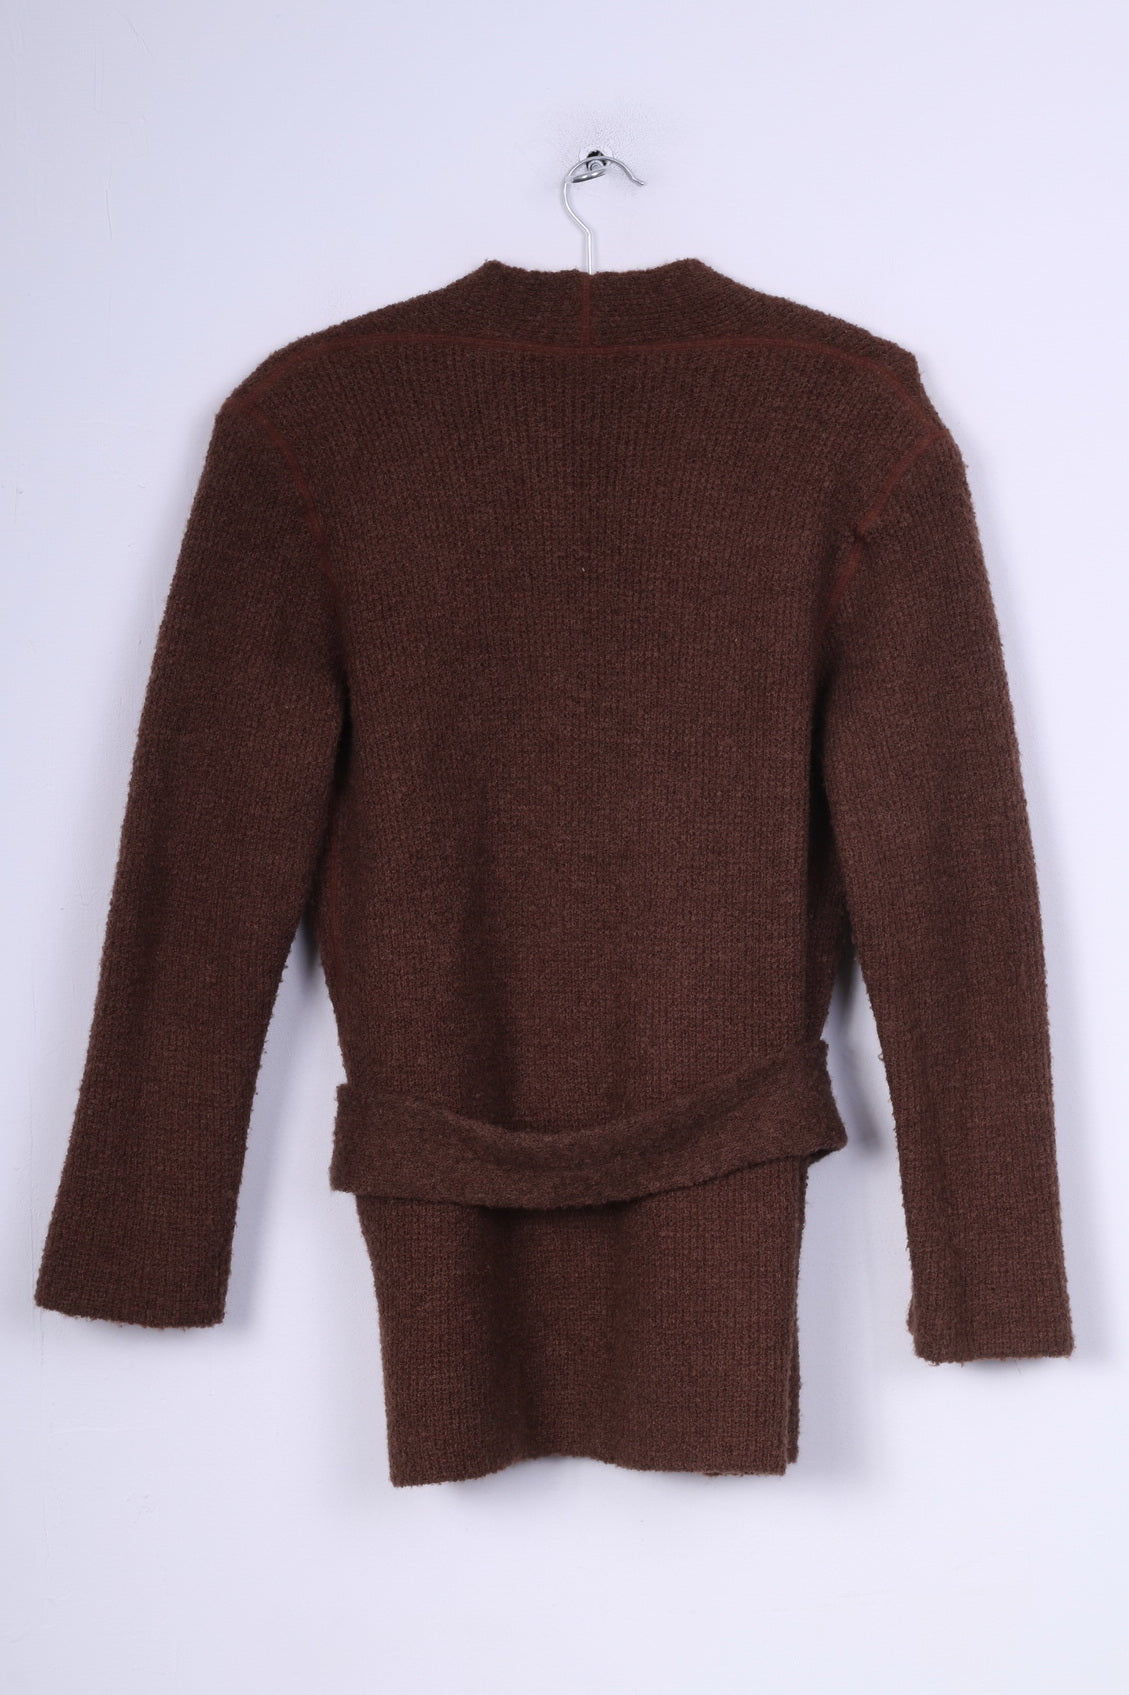 Griffe Tricot Femme 50 Cardigan Pull Marron Vintage